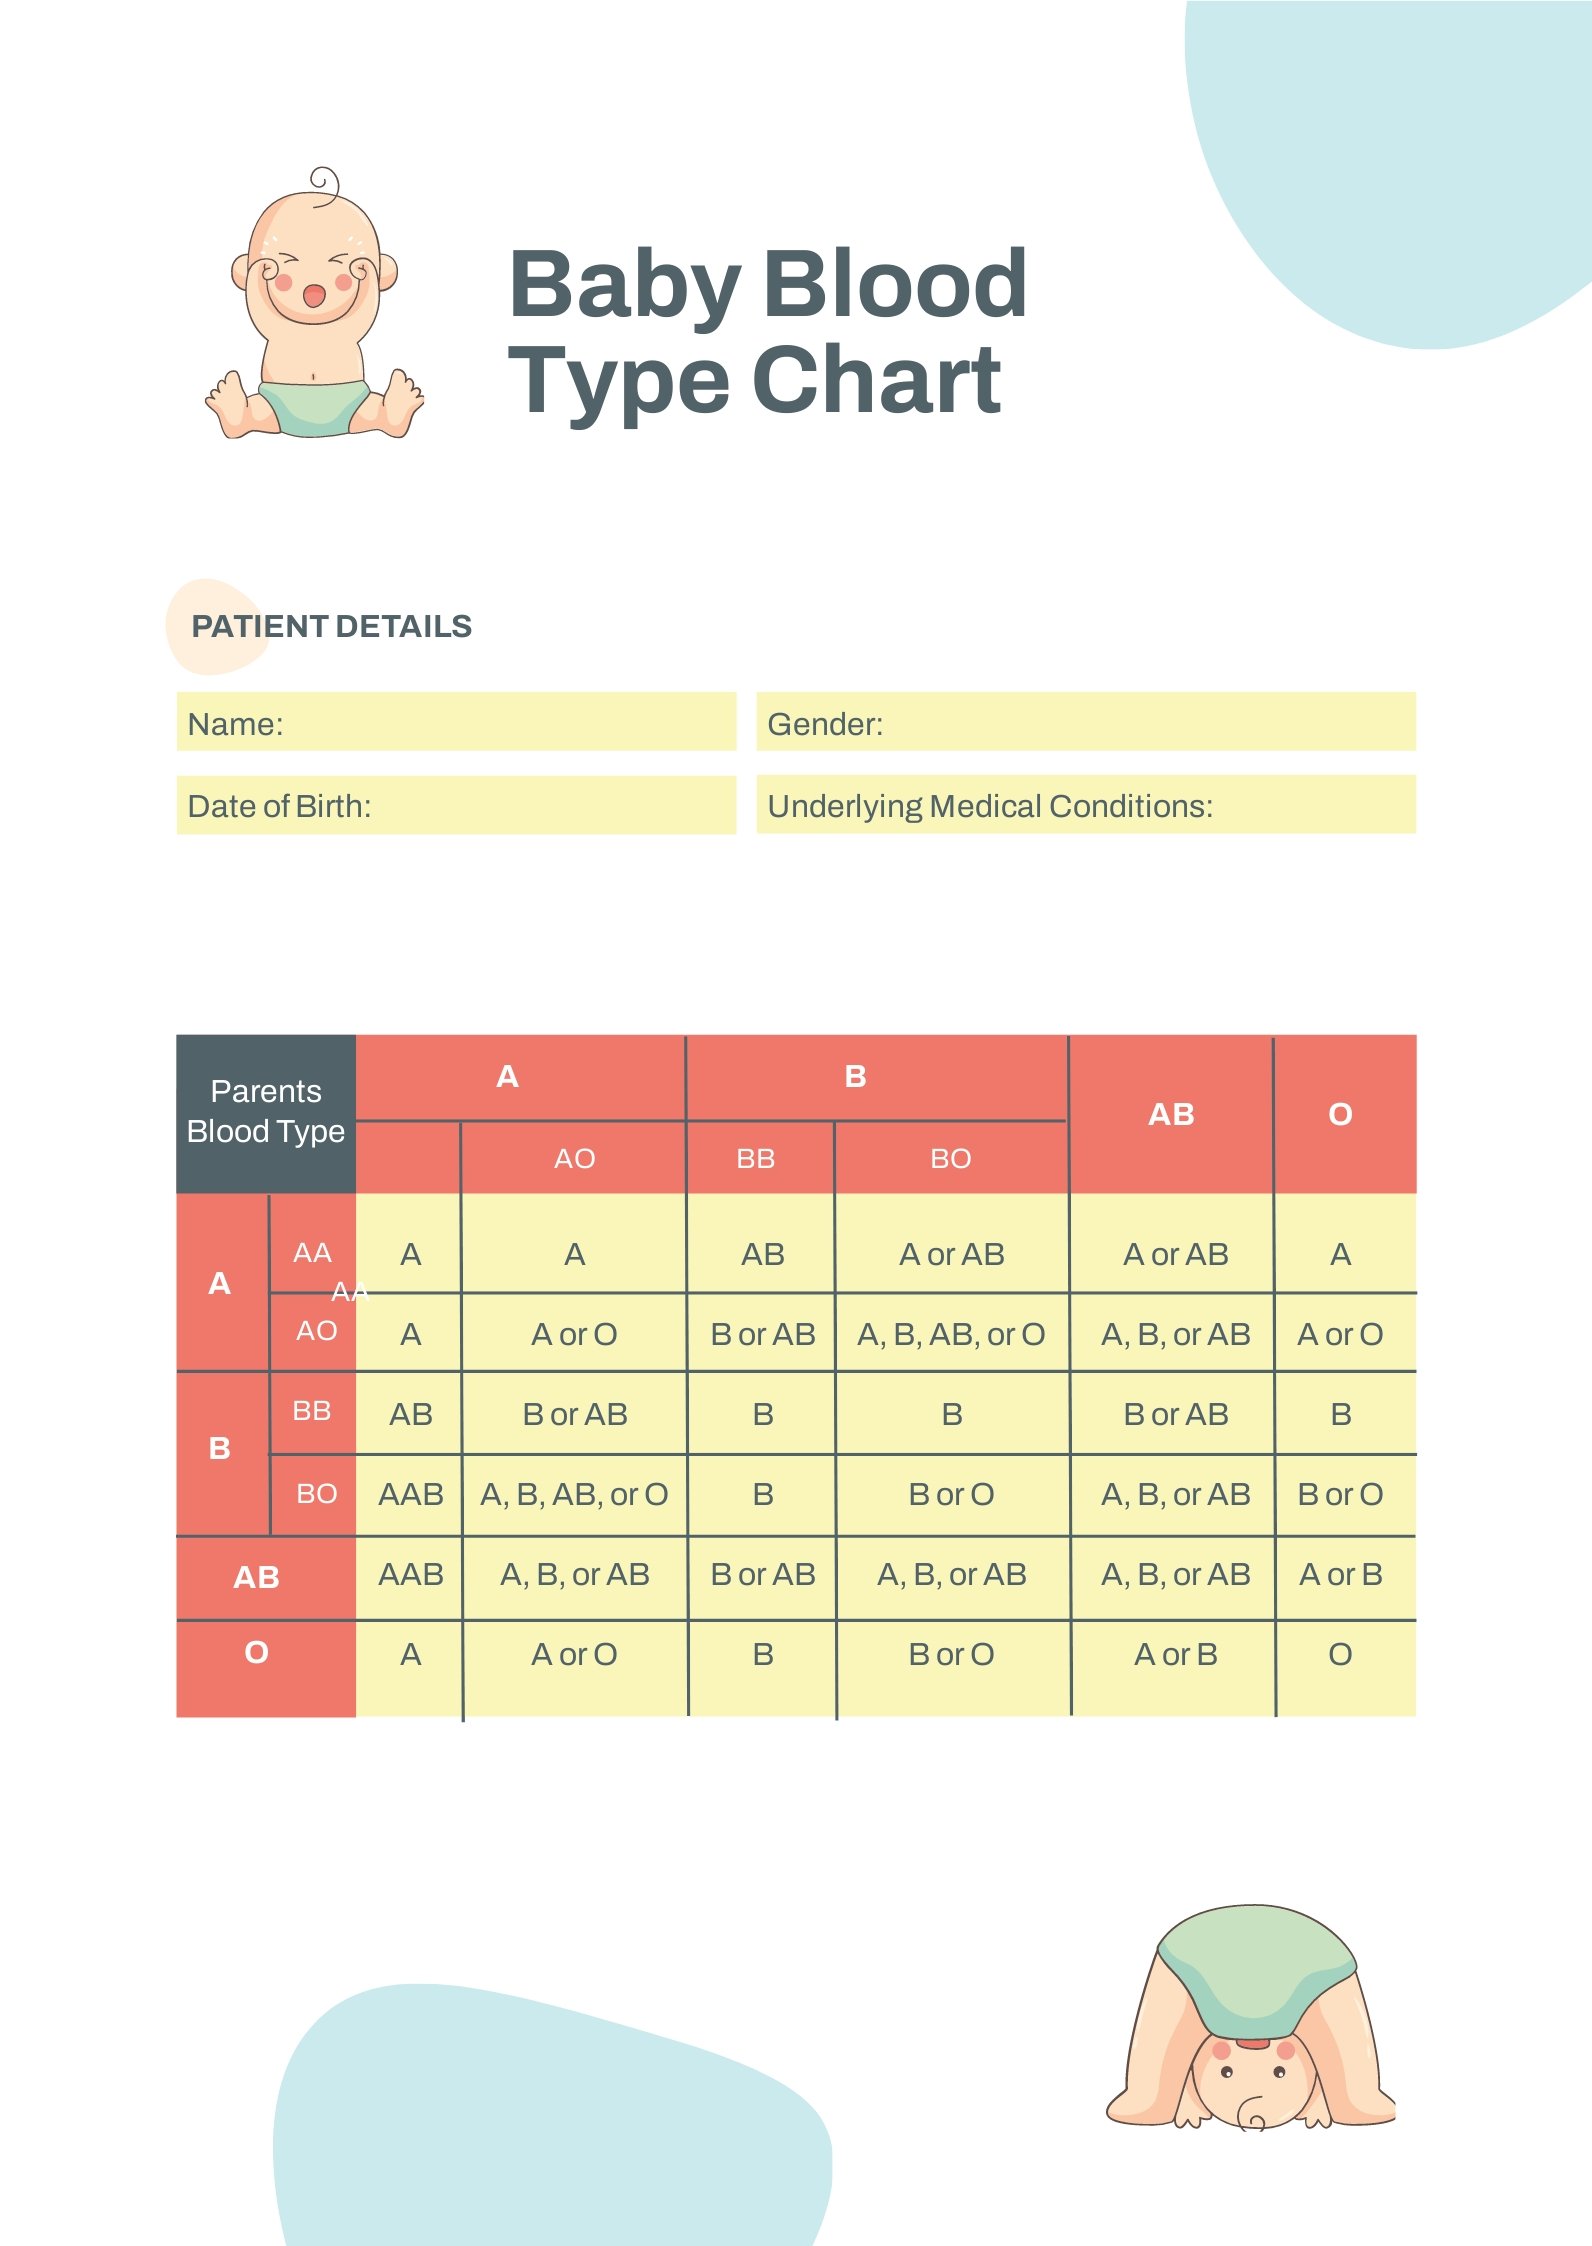 Baby Blood Type Chart